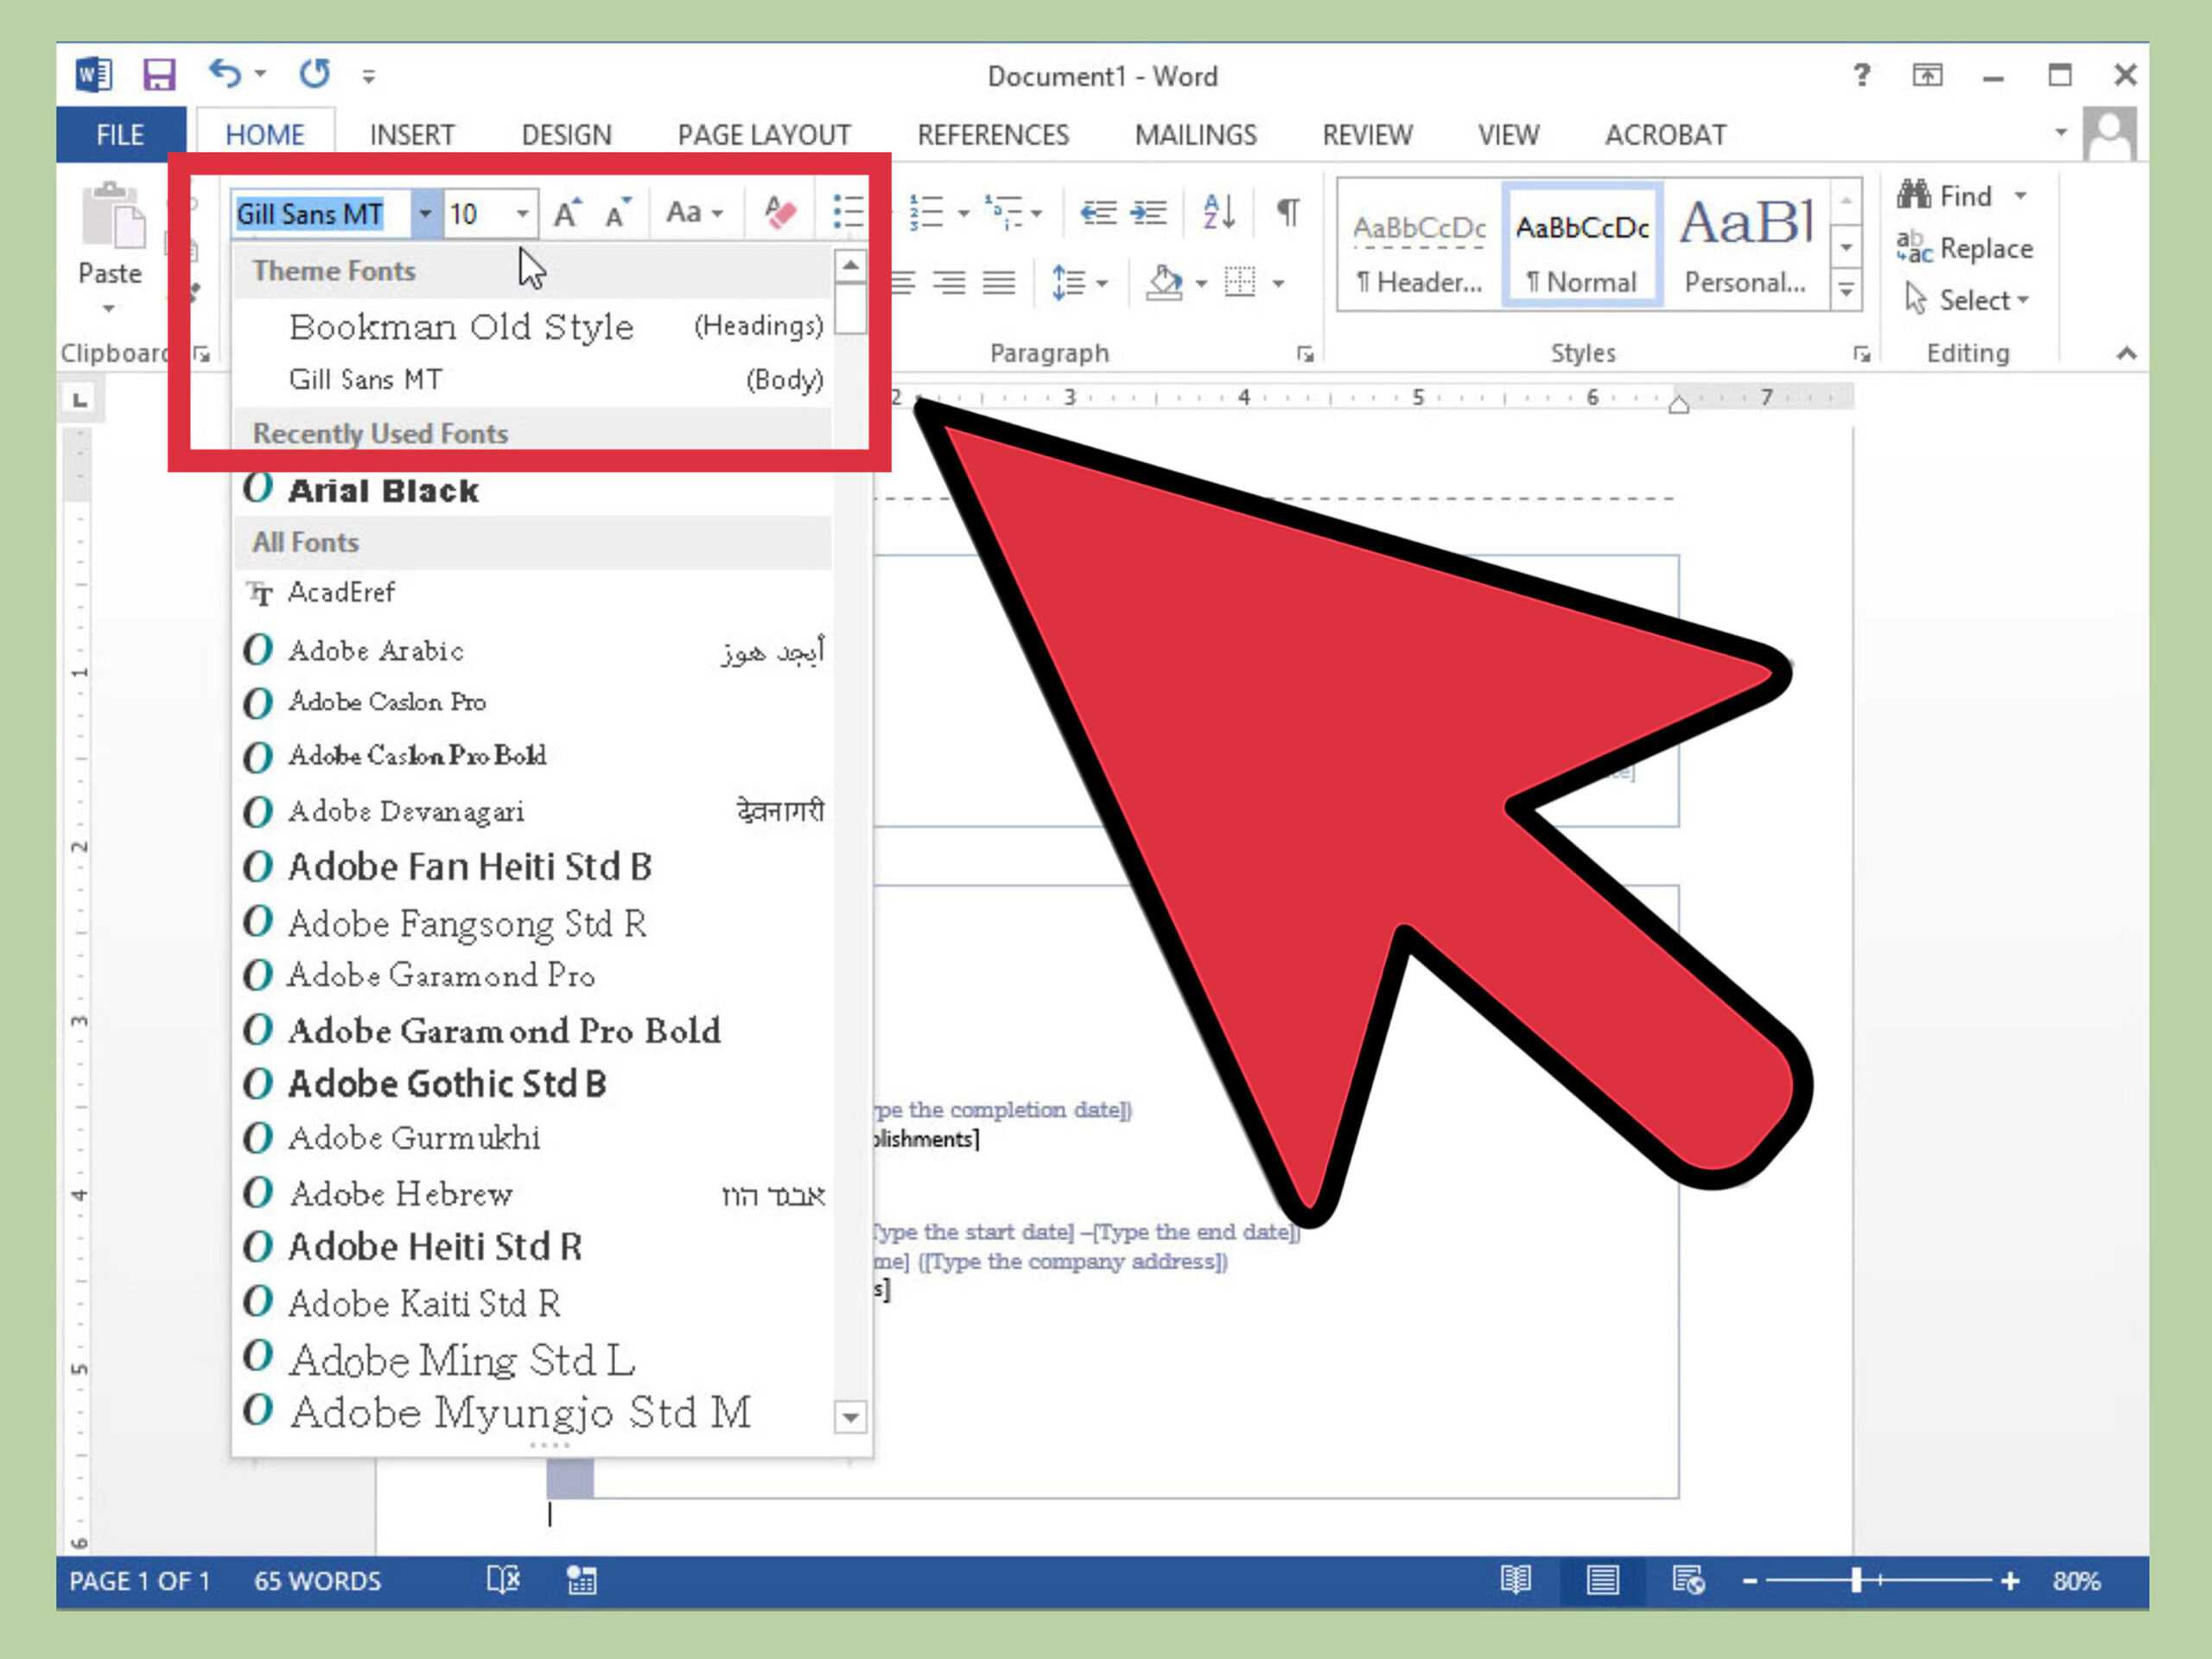 How To Get To Resume Template On Microsoft Word – Karan Intended For How To Find A Resume Template On Word